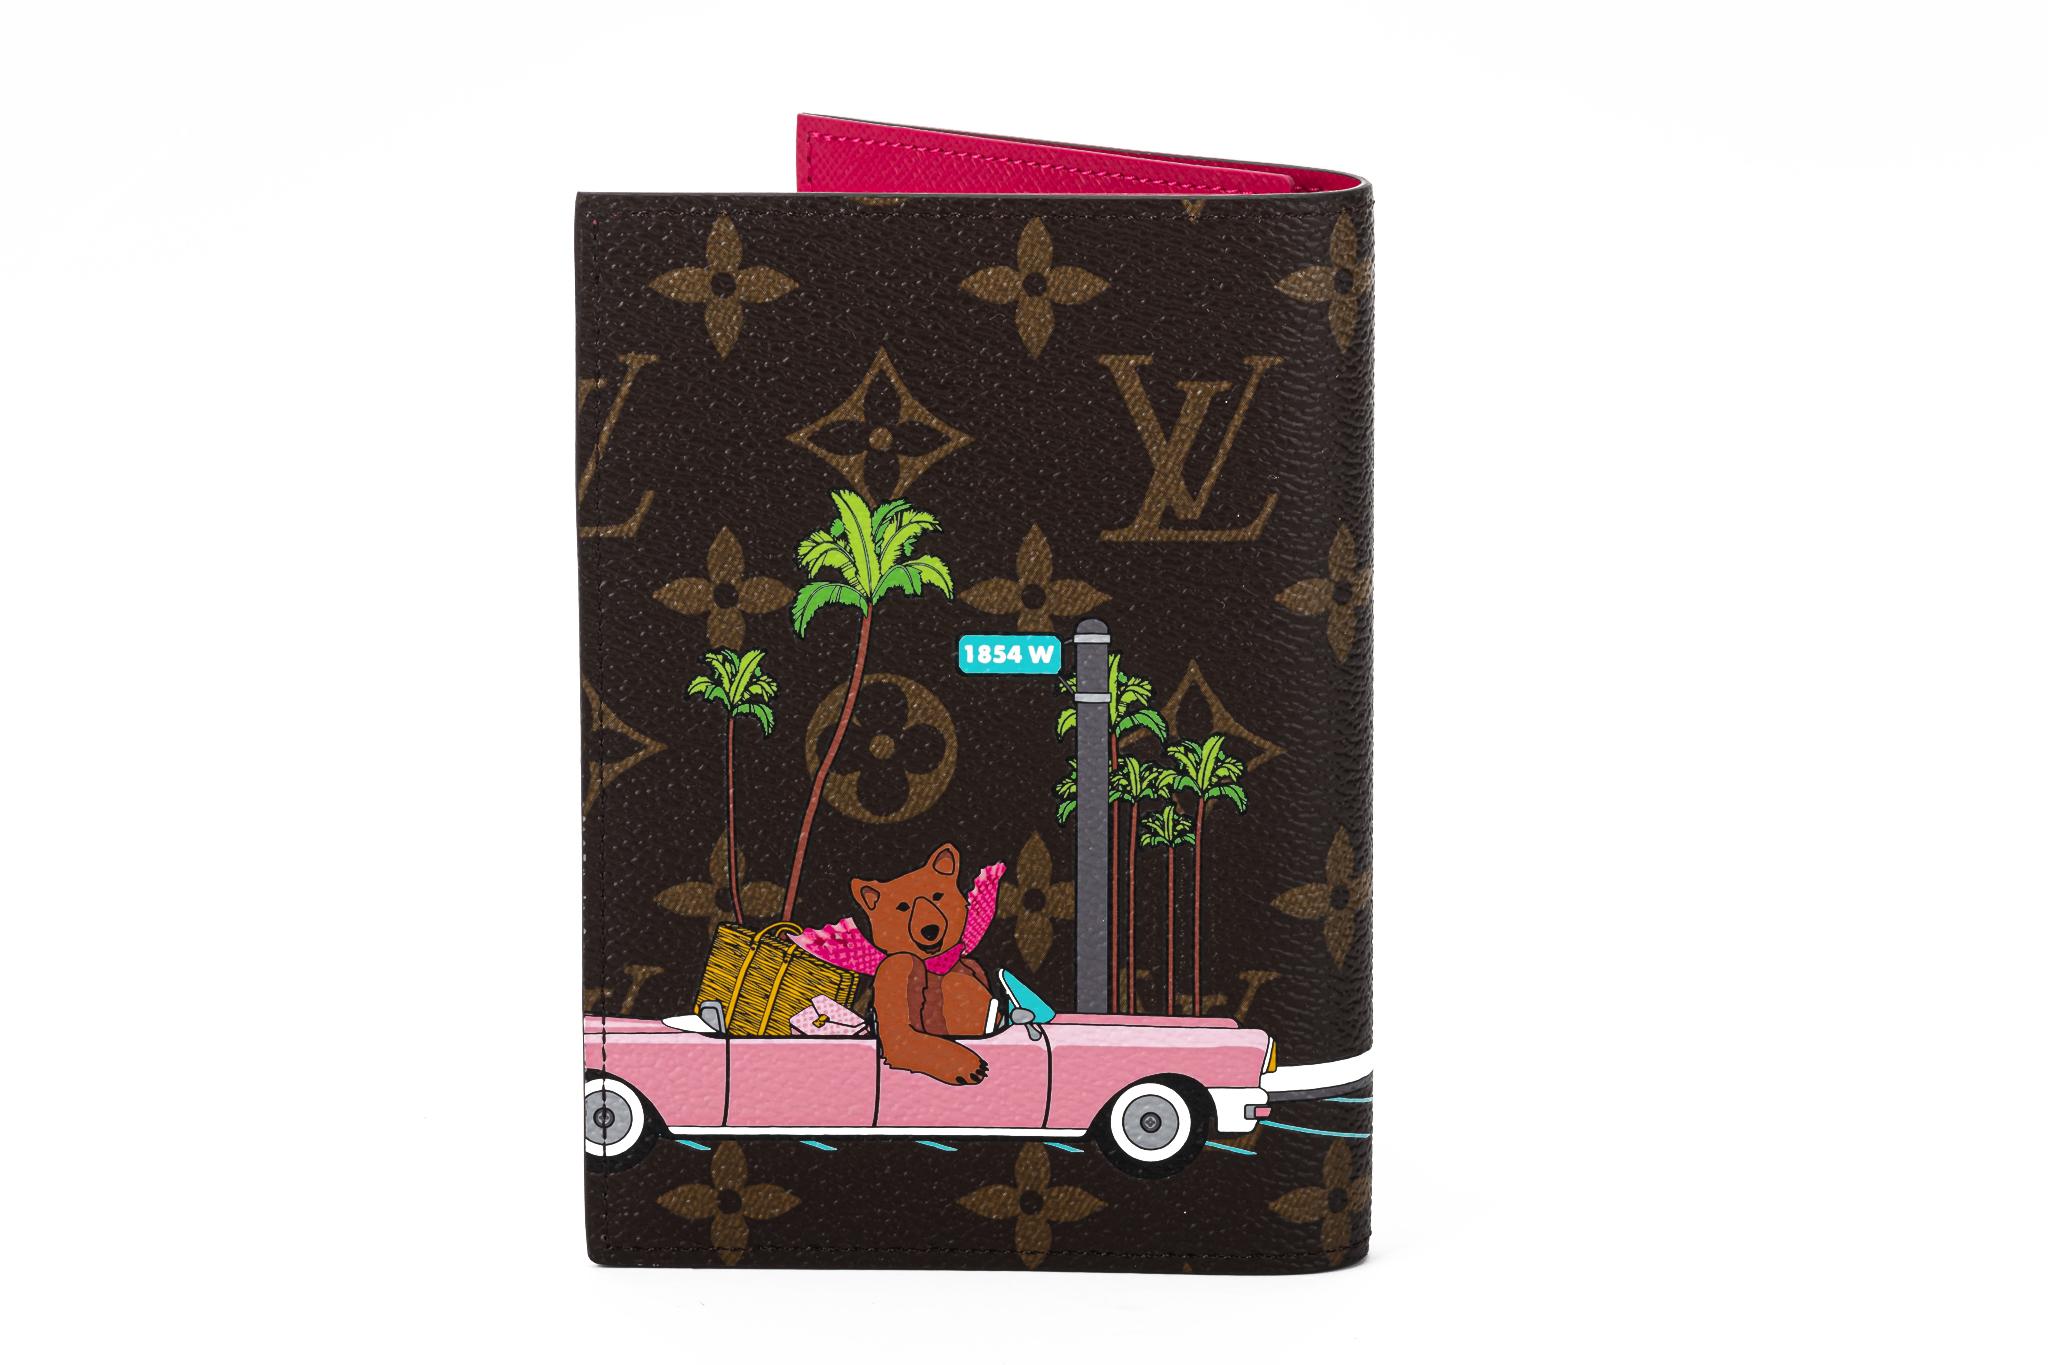 Louis Vuitton Passport Cover Hollywood In Excellent Condition For Sale In West Hollywood, CA